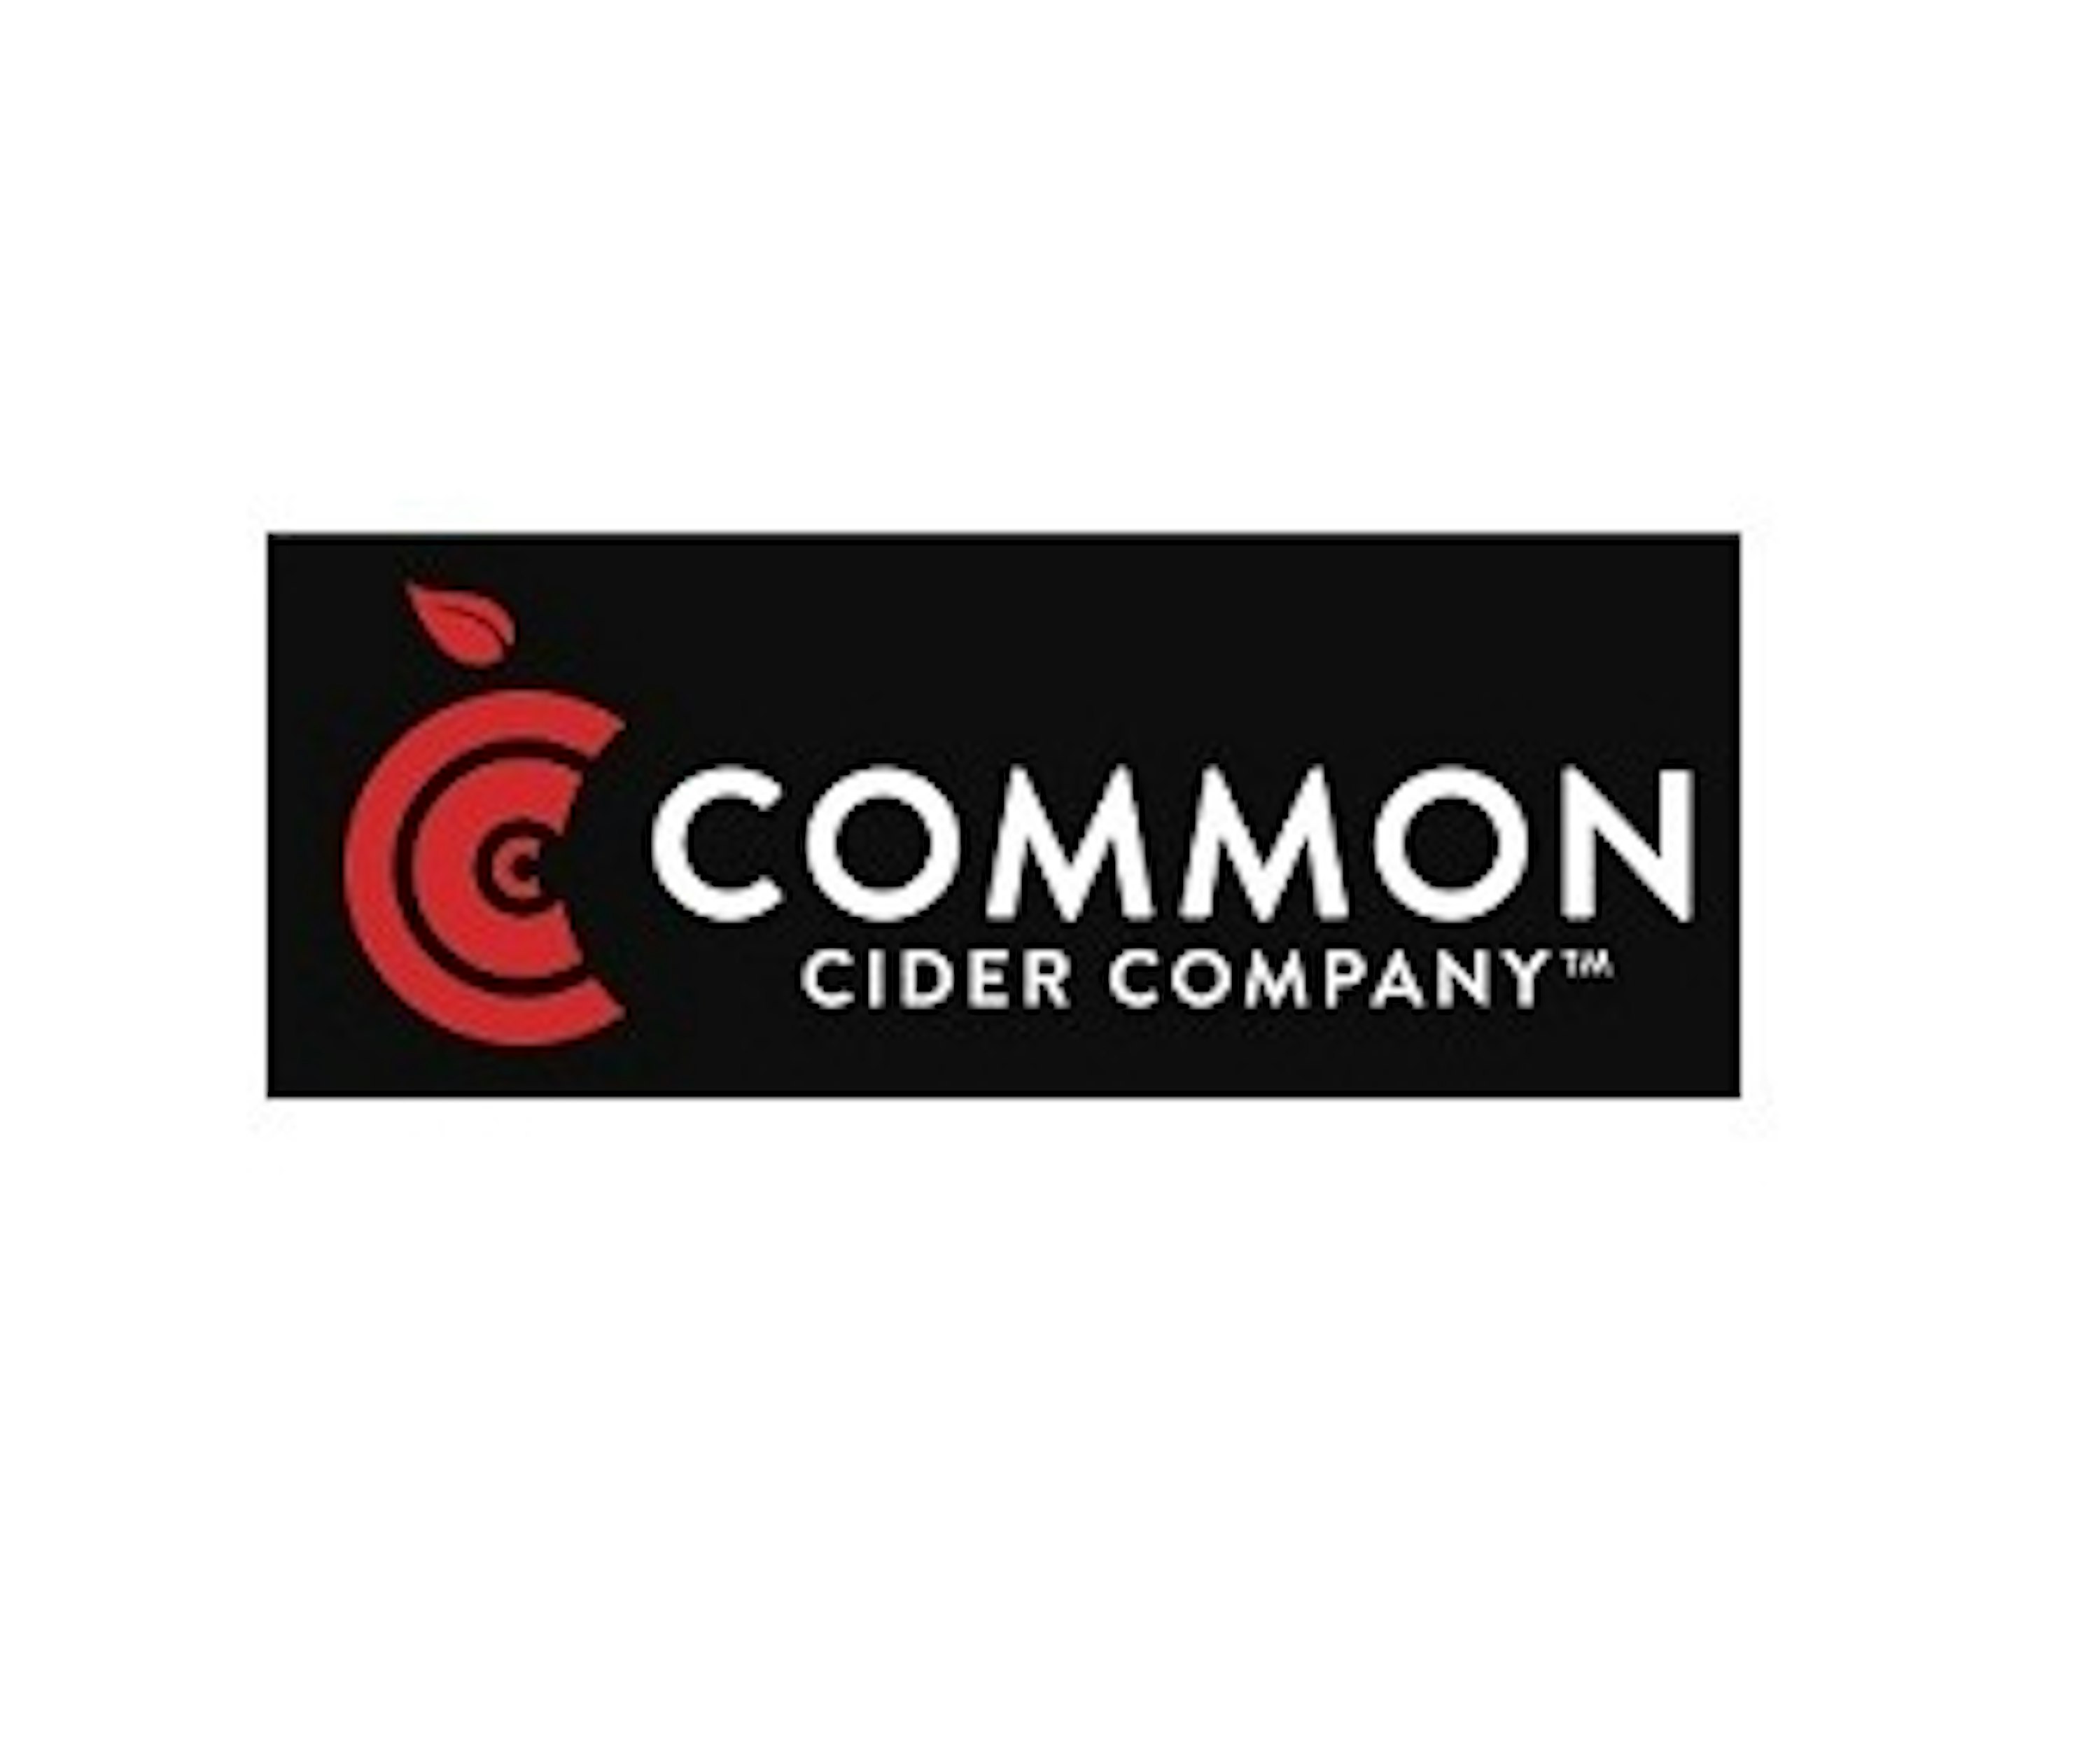 Enjoy the delicious dry hard ciders from Common Cider